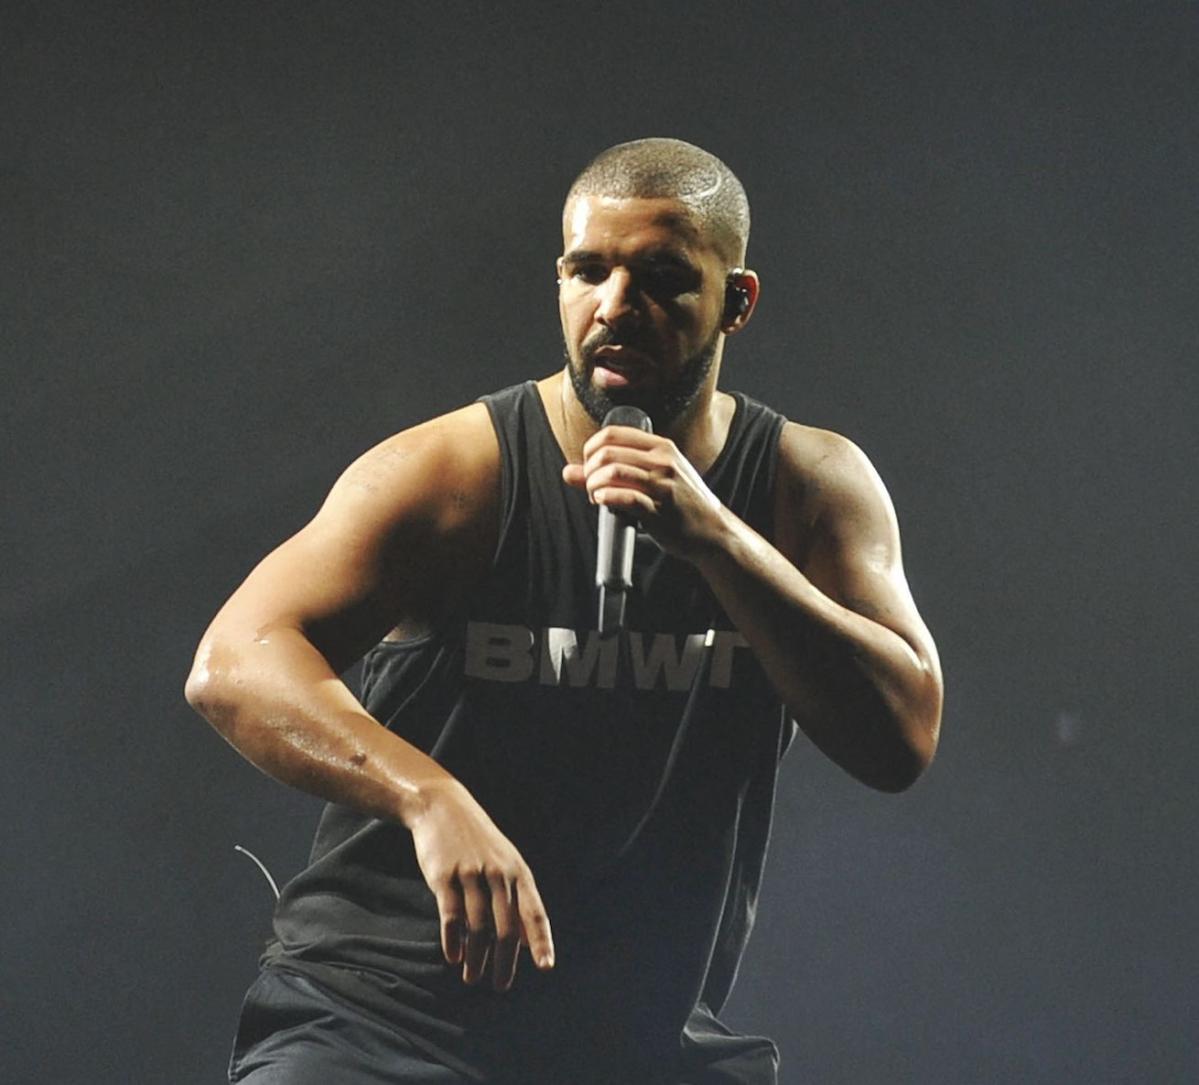 Drake Fan Who Threw 36G Bra on Stage Gets Offer to Work for Playboy After  Viral Concert Clip